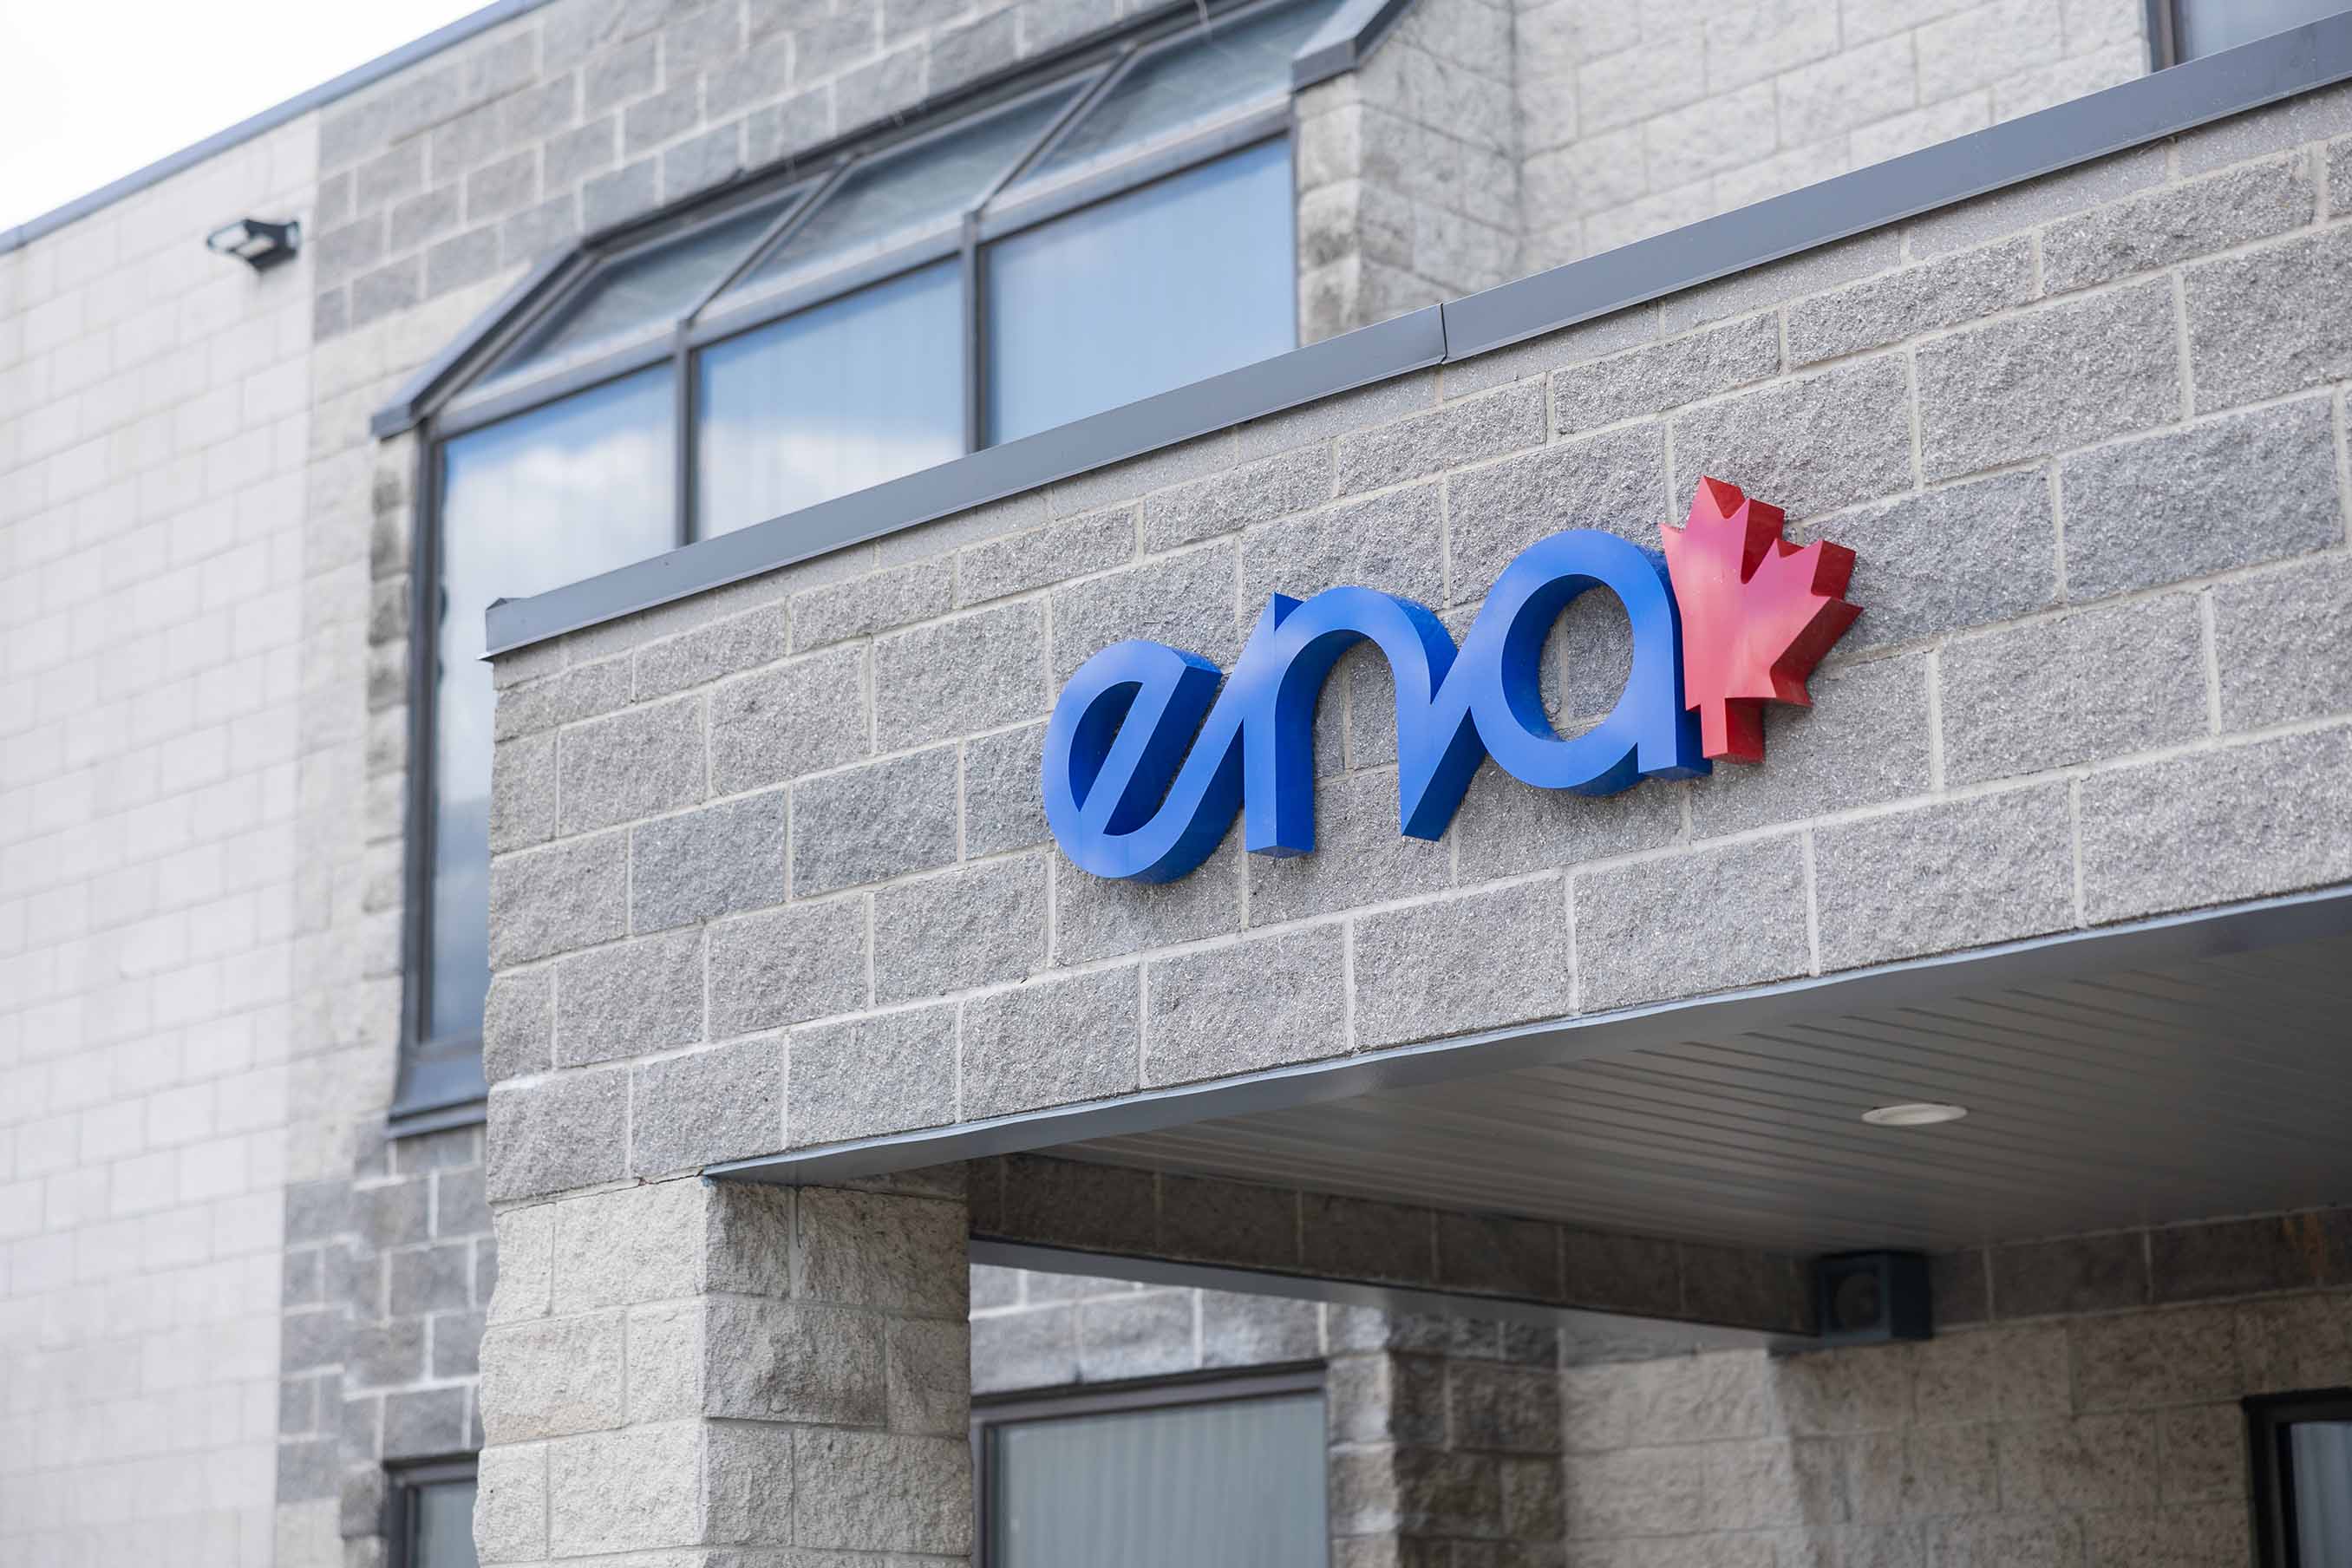 The exterior sign of ENA, blue with a maple leaf